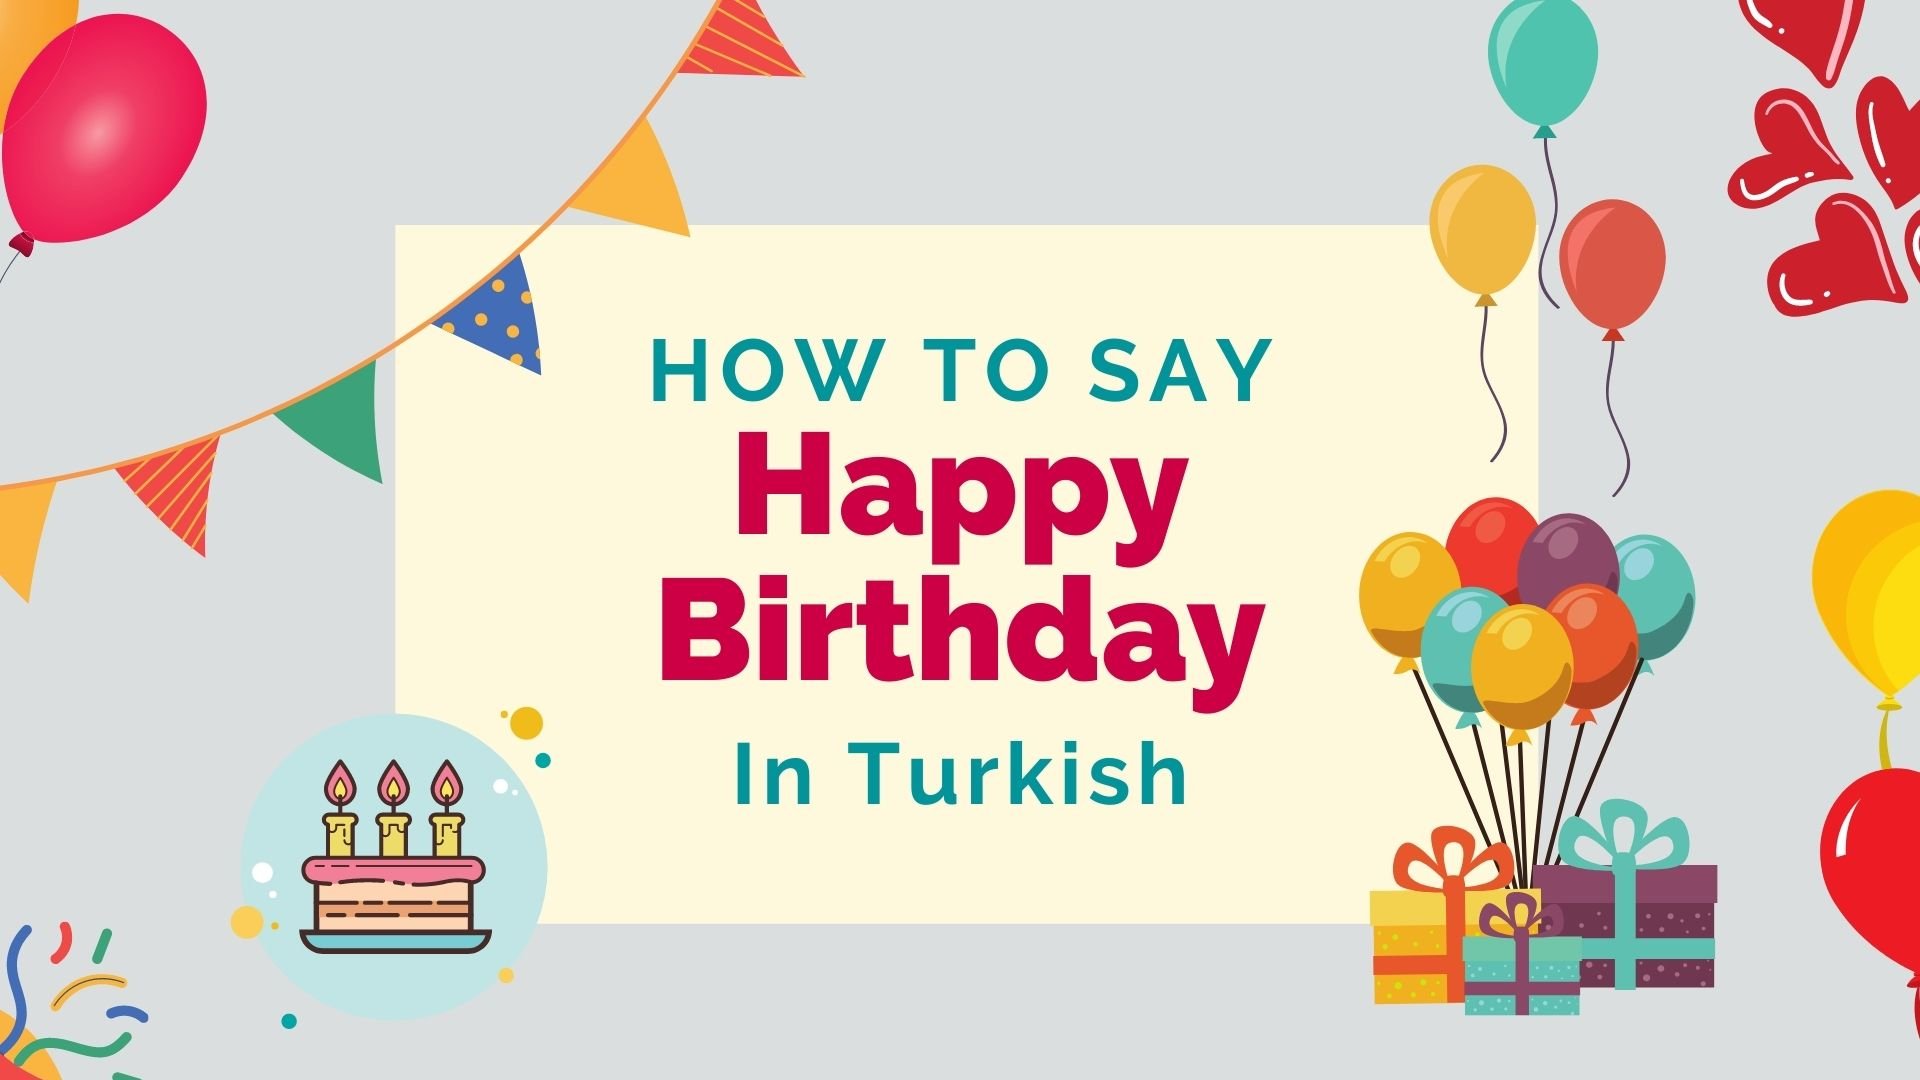 How To Say 'Happy Birthday' In Turkish - Lingalot